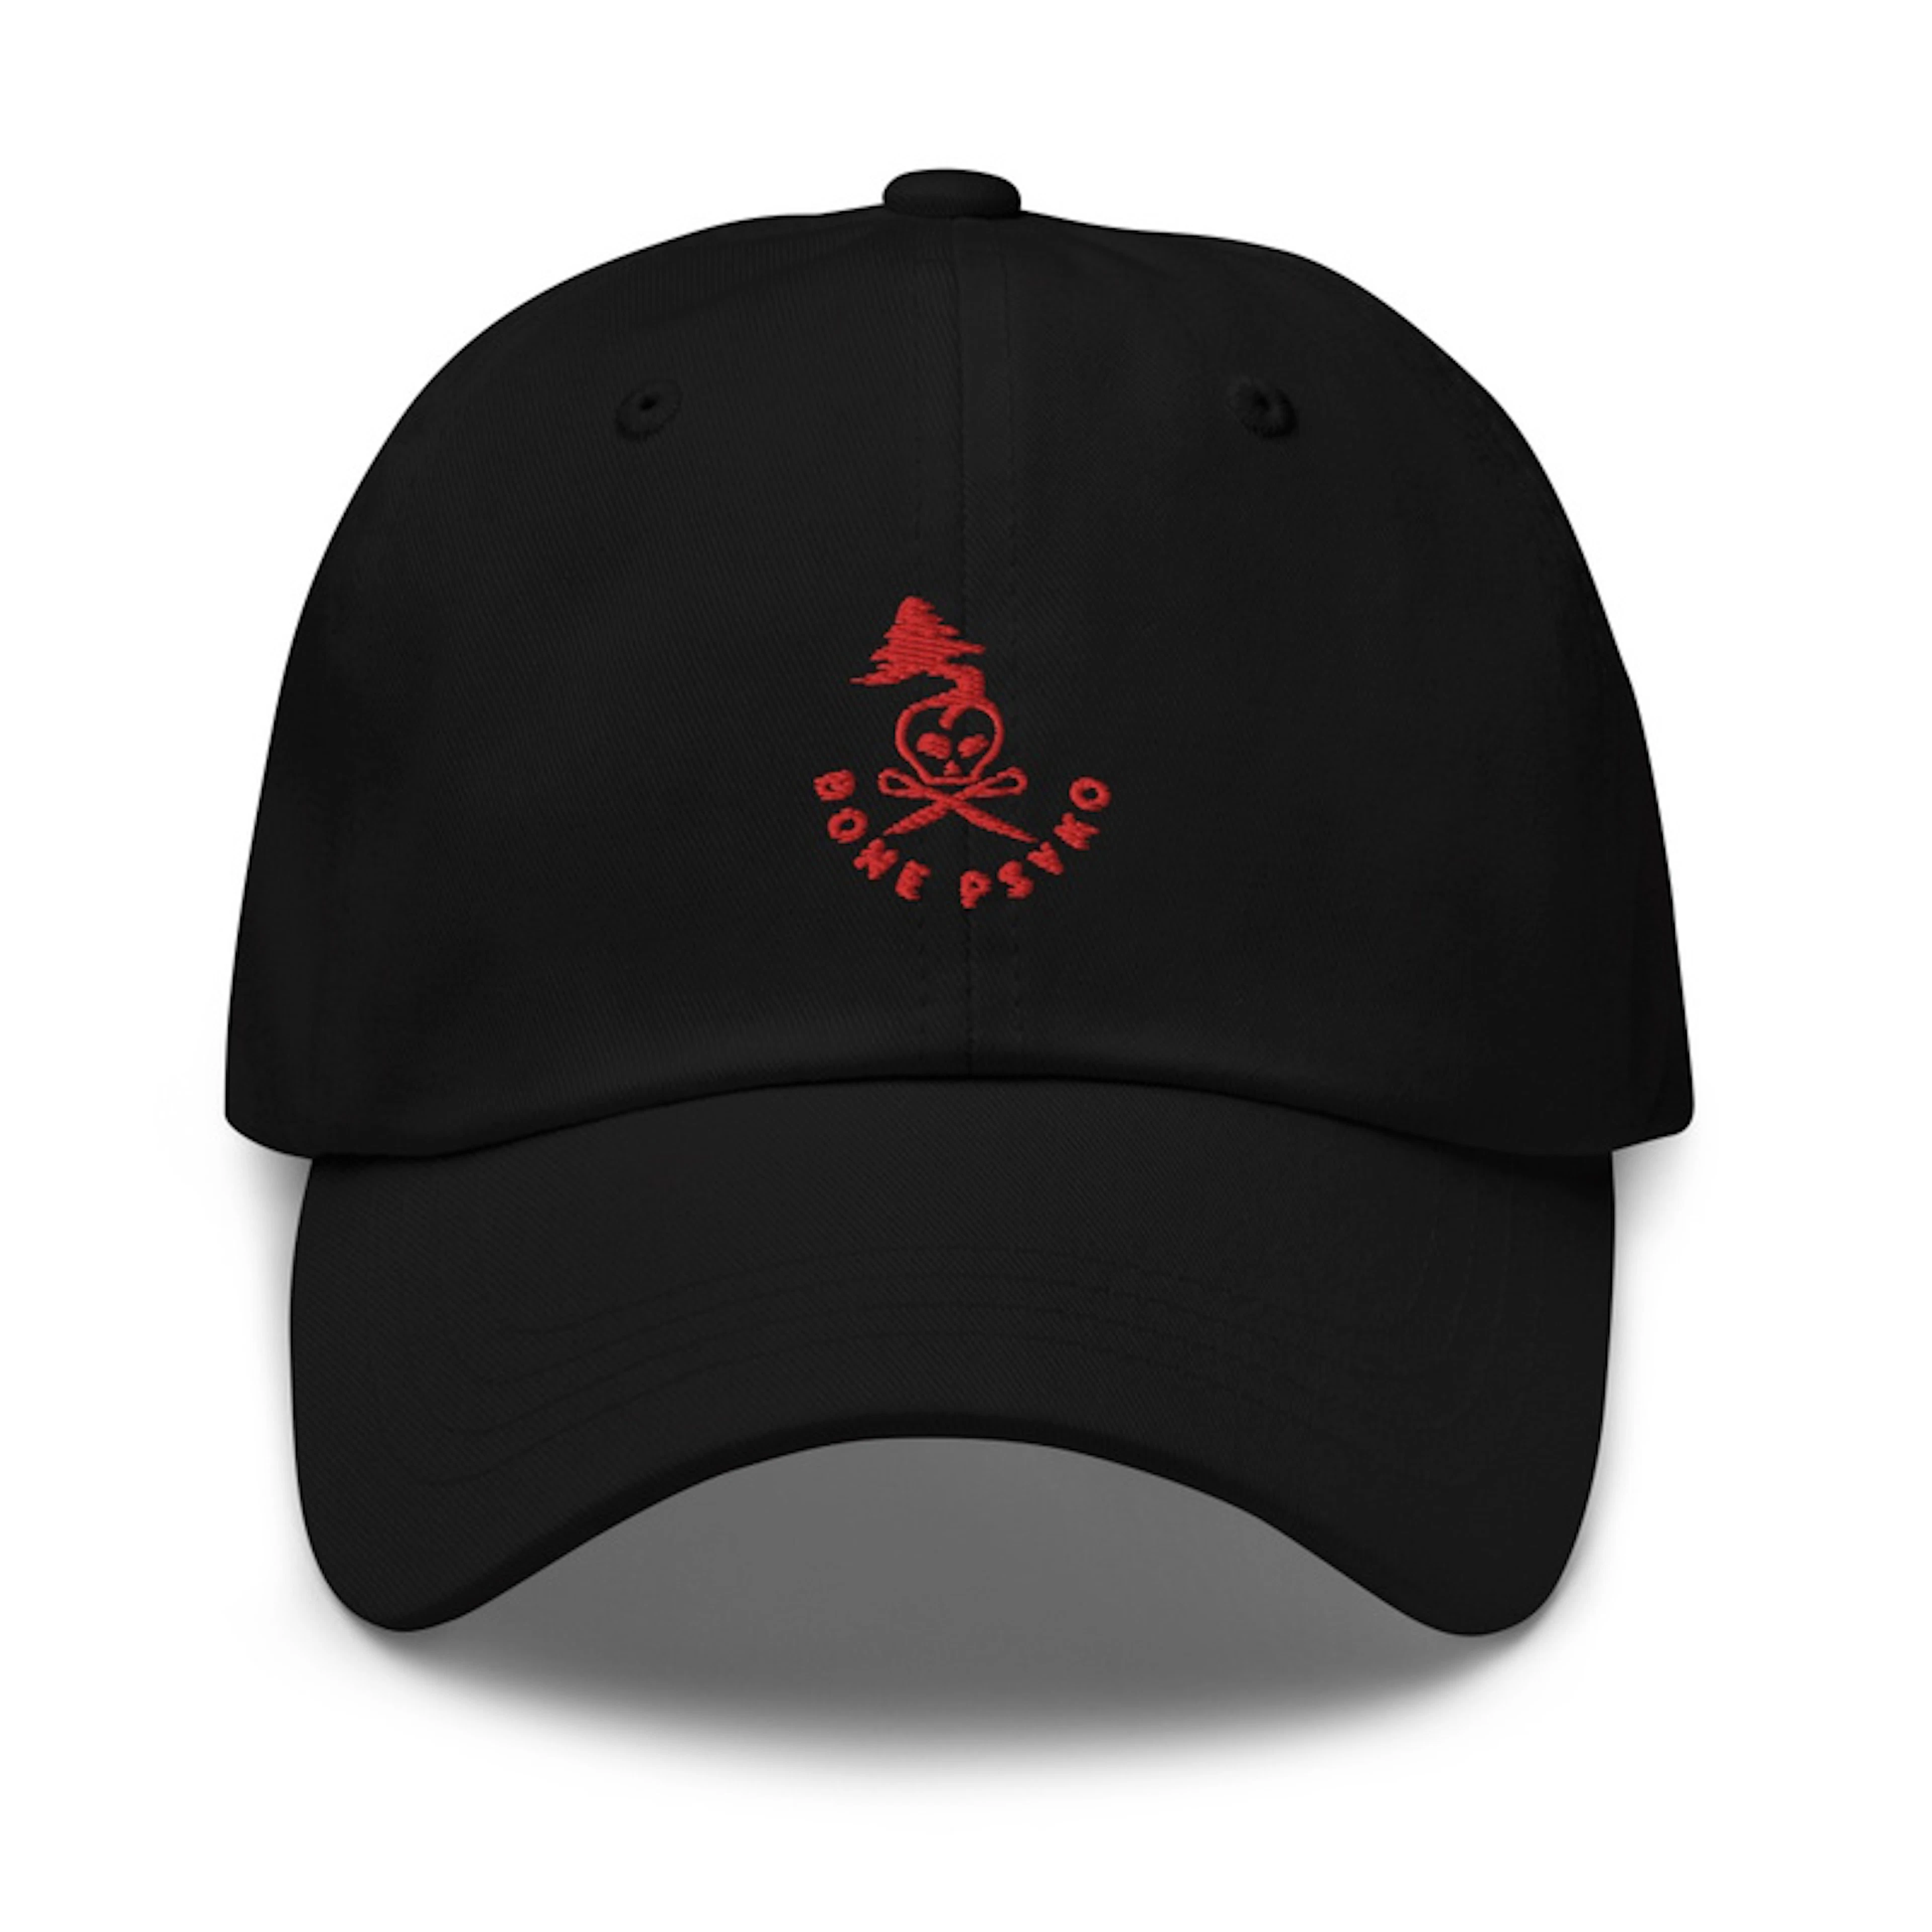 Black hat with red logo